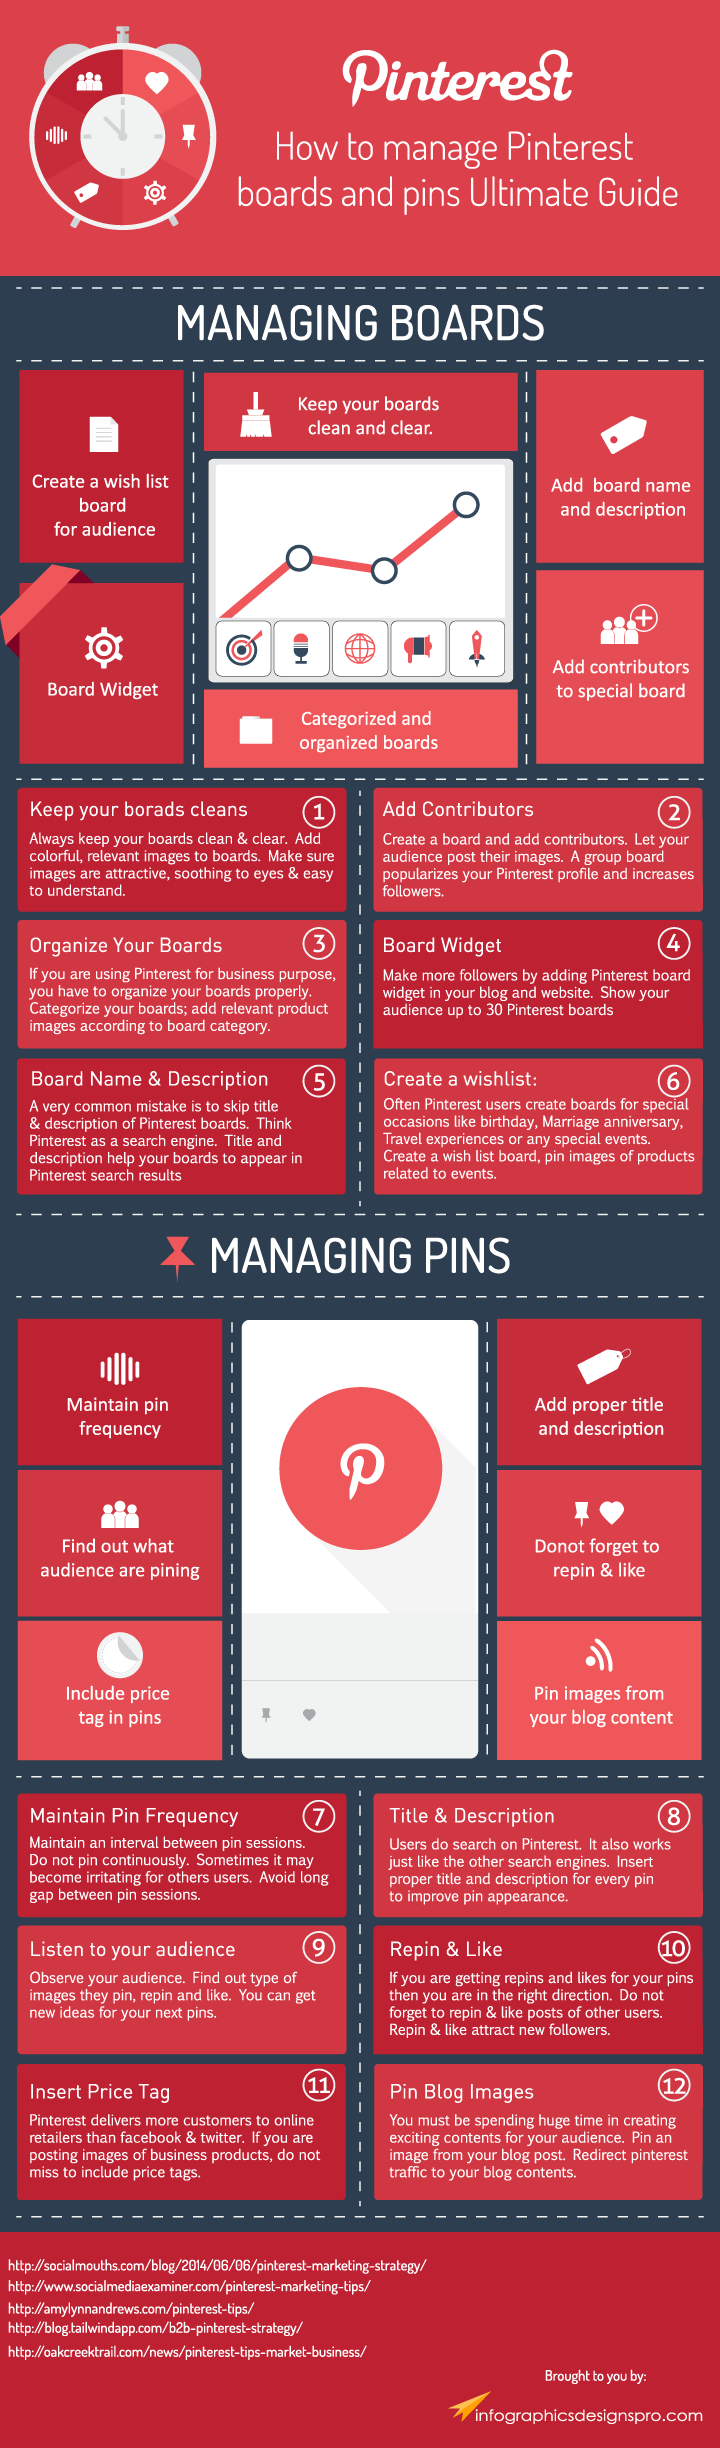 The Art Of Managing Pinterest Pins And Boards - #infographic #socialmedia